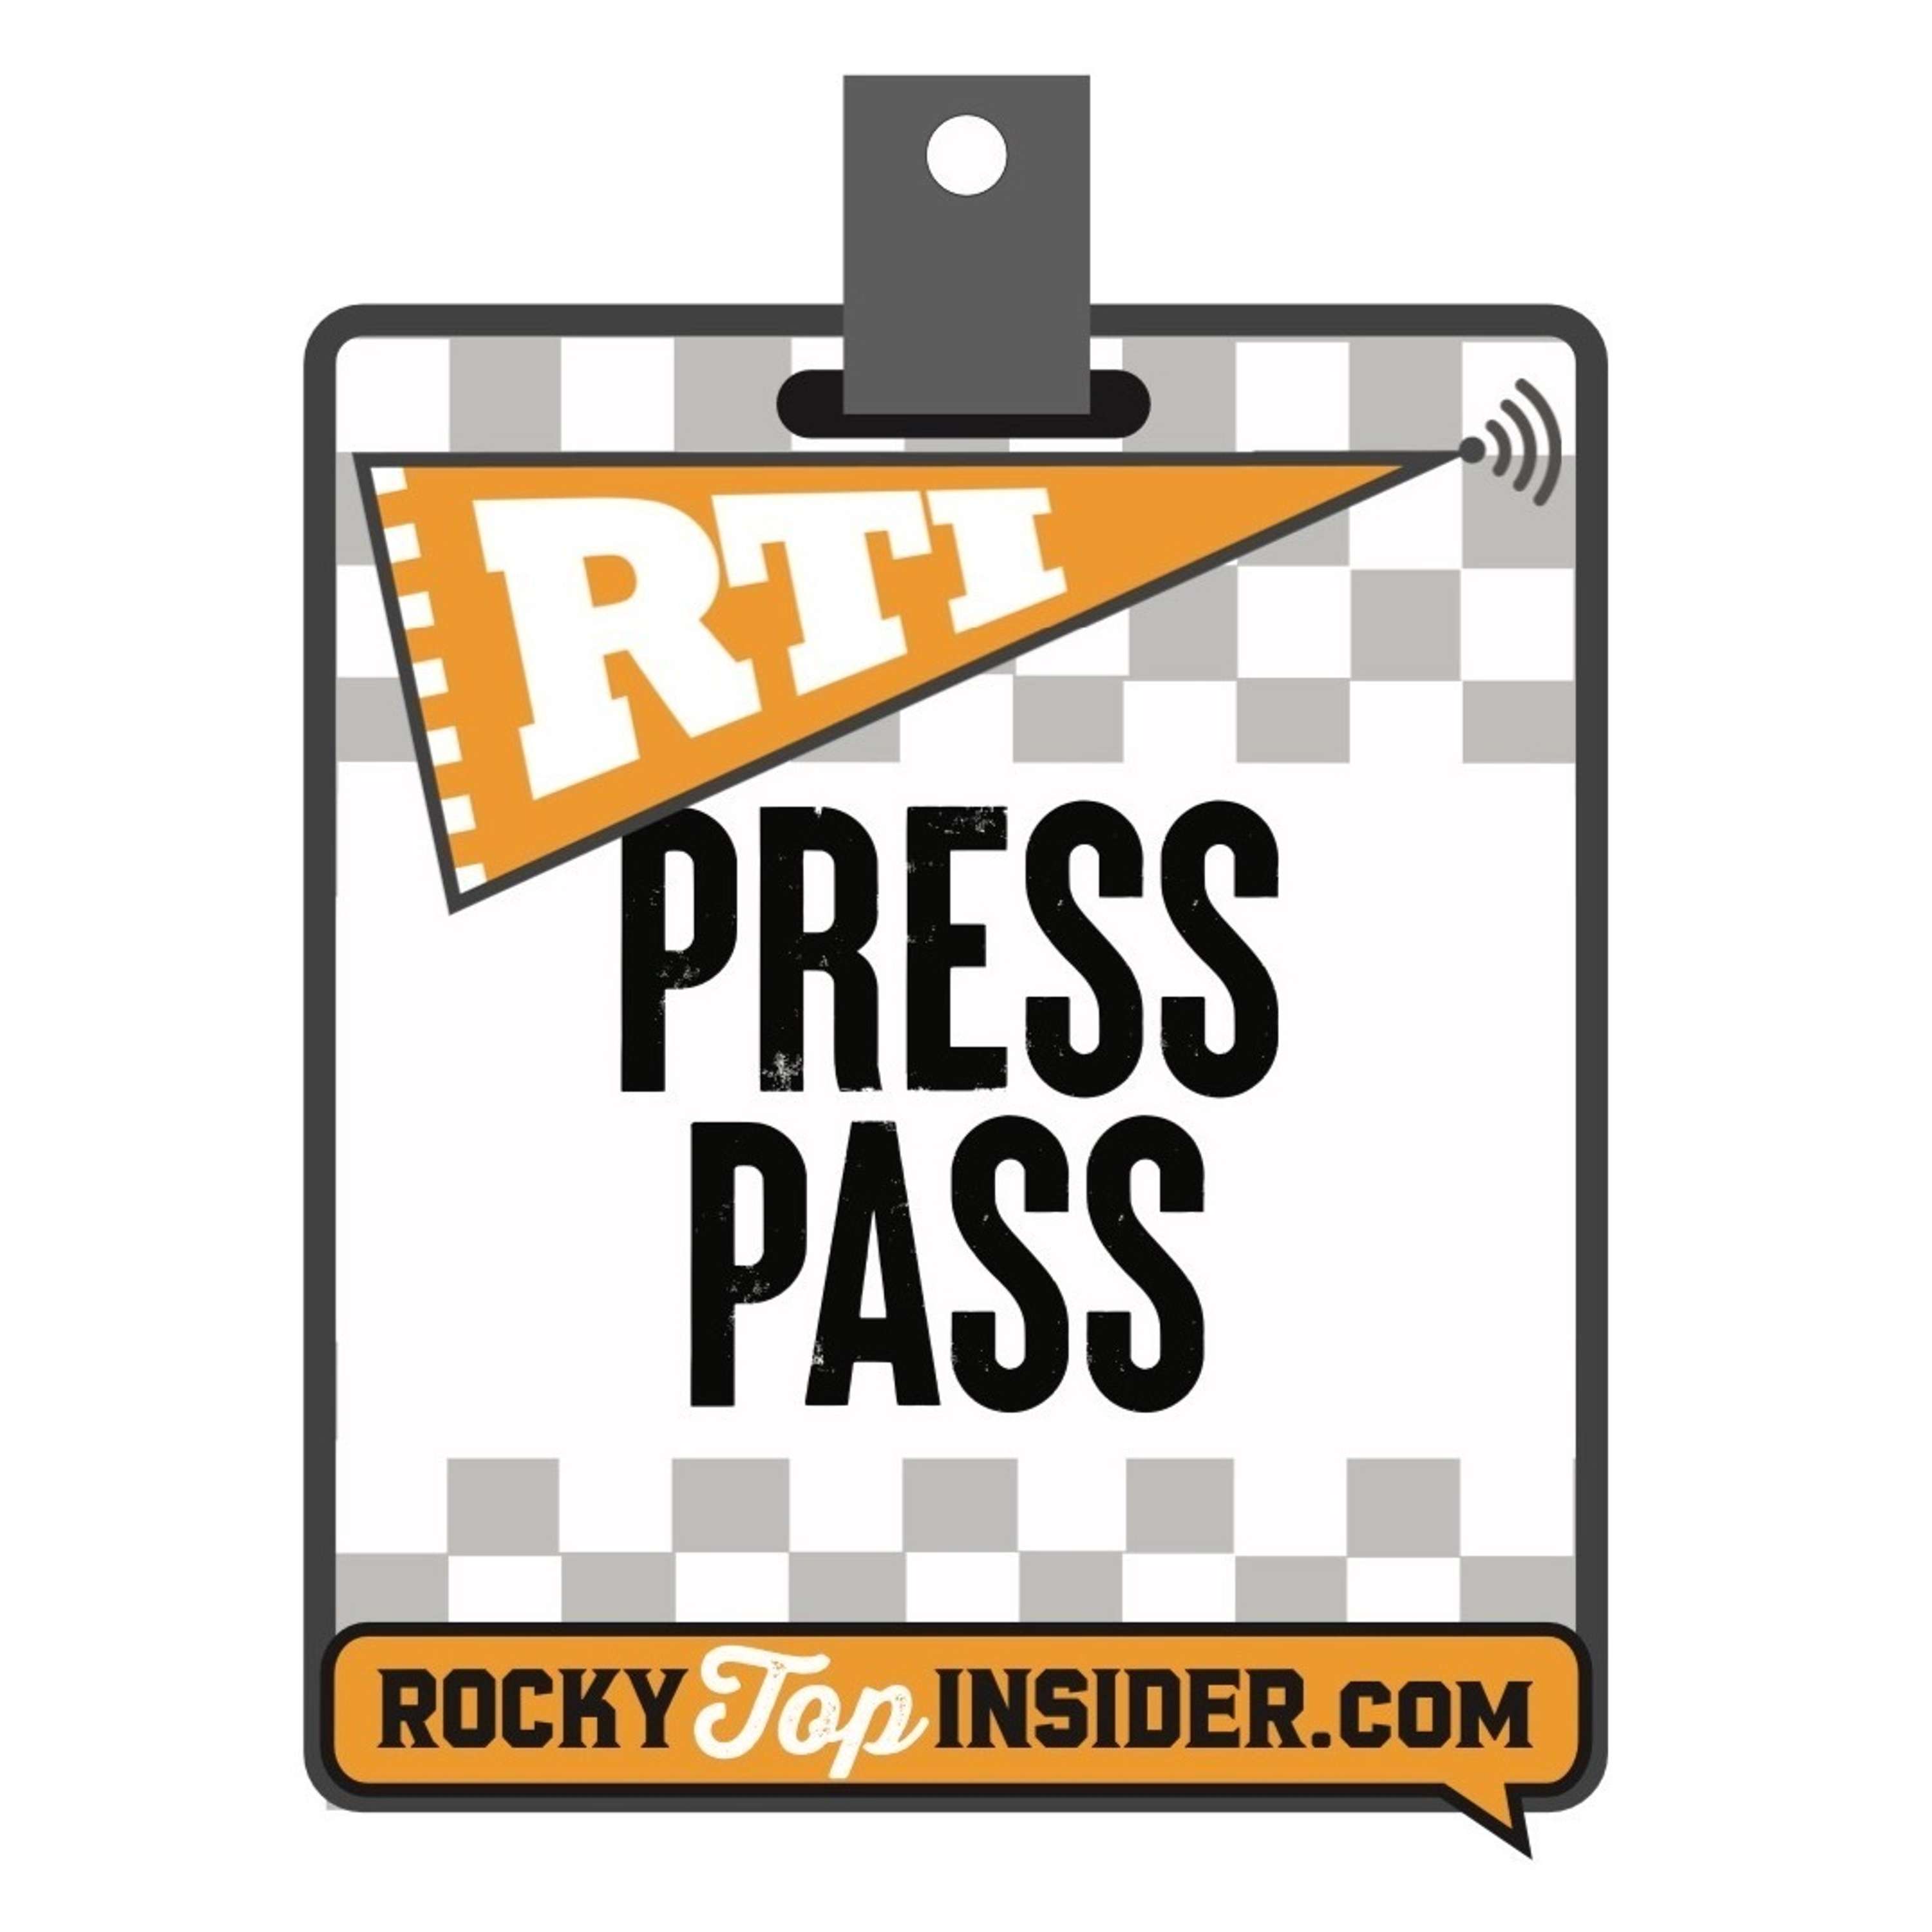 Sweet 16 Creighton Preview, Tennessee Baseball Recap and Breakdown | RTI Press Pass